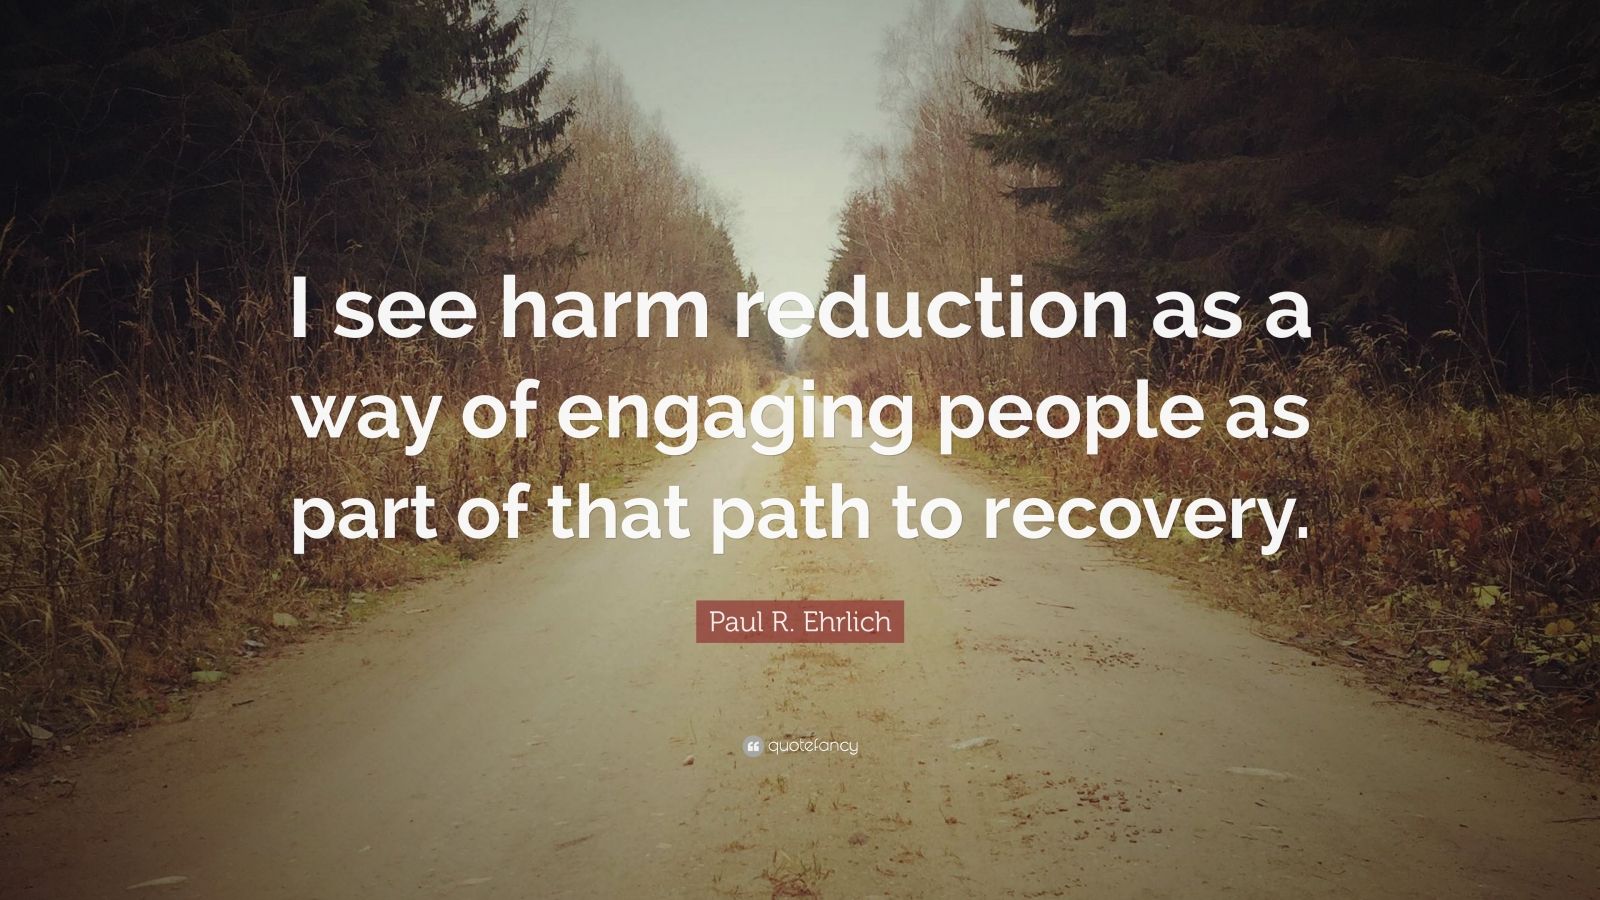 Paul R. Ehrlich Quote: “I see harm reduction as a way of engaging